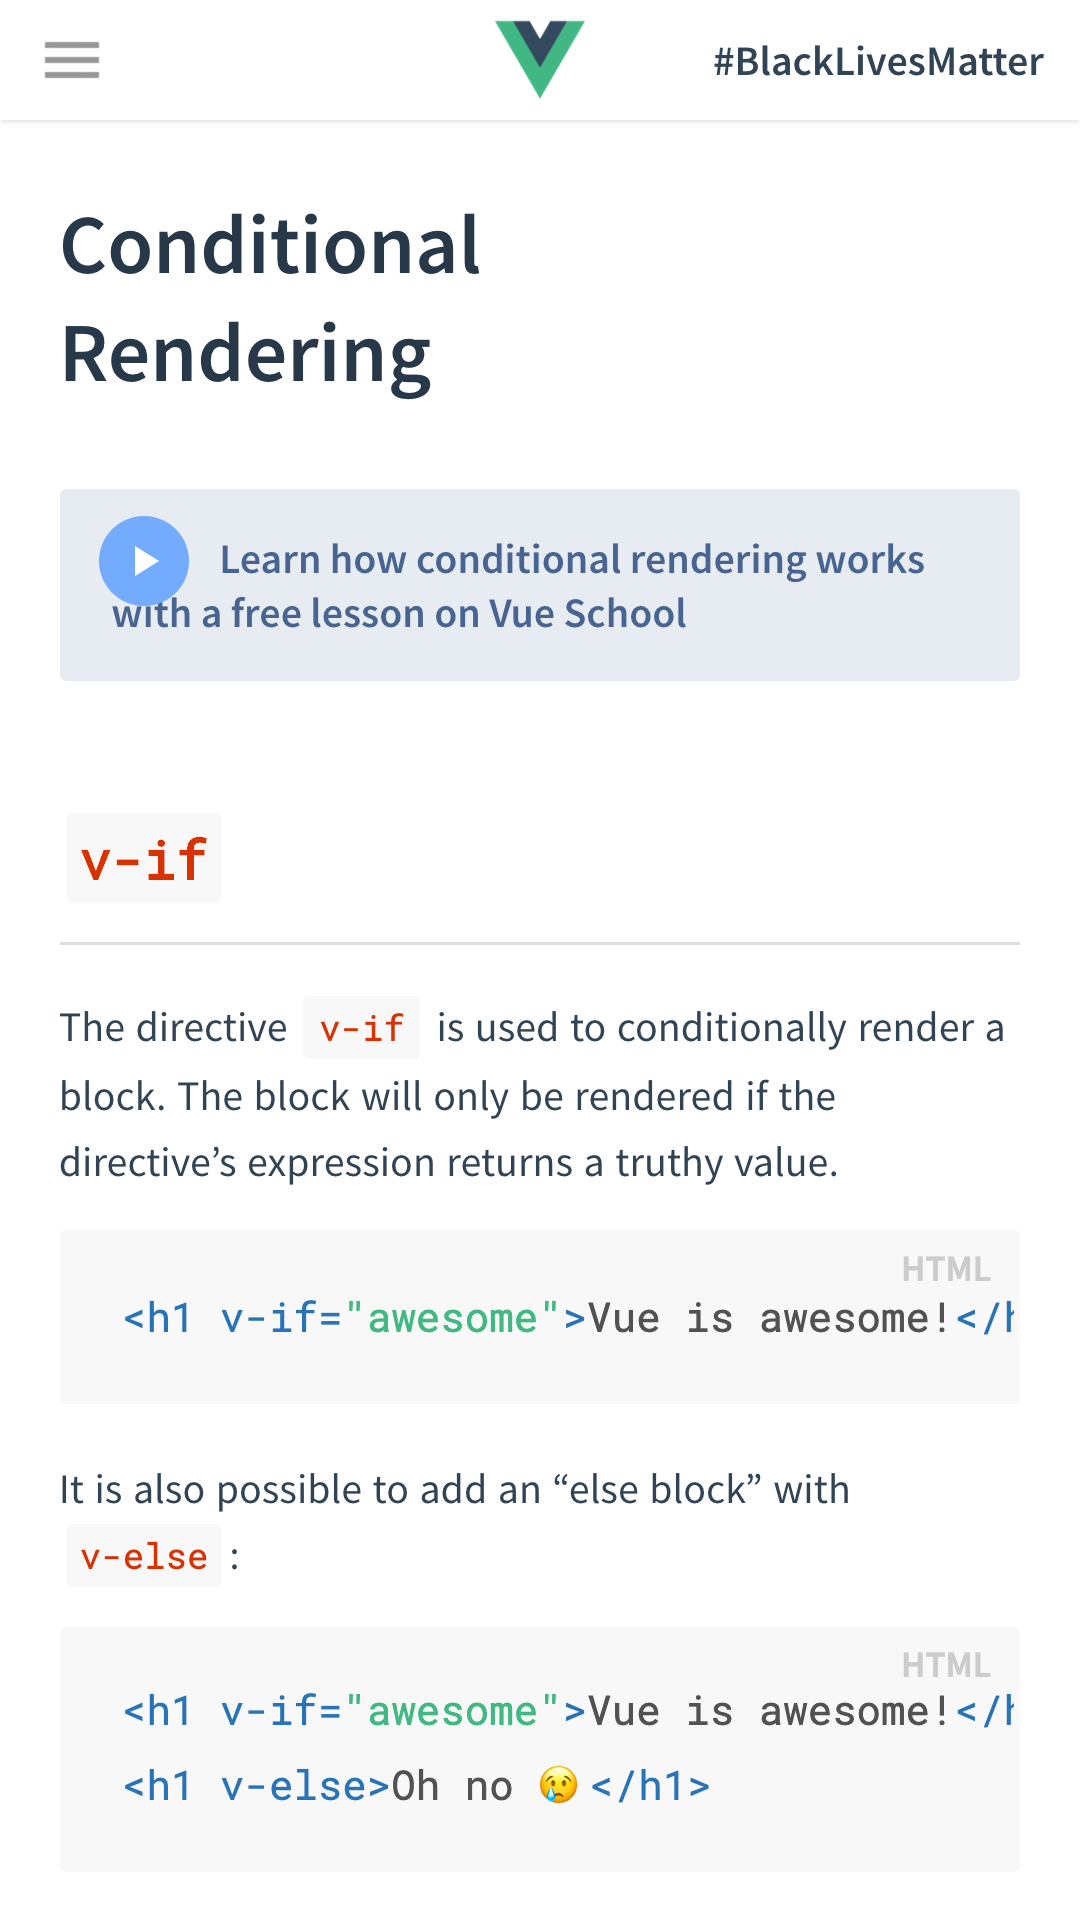 Vue Docs on mobile UI. Conditional Rendering, many code examples for the v-if directive.